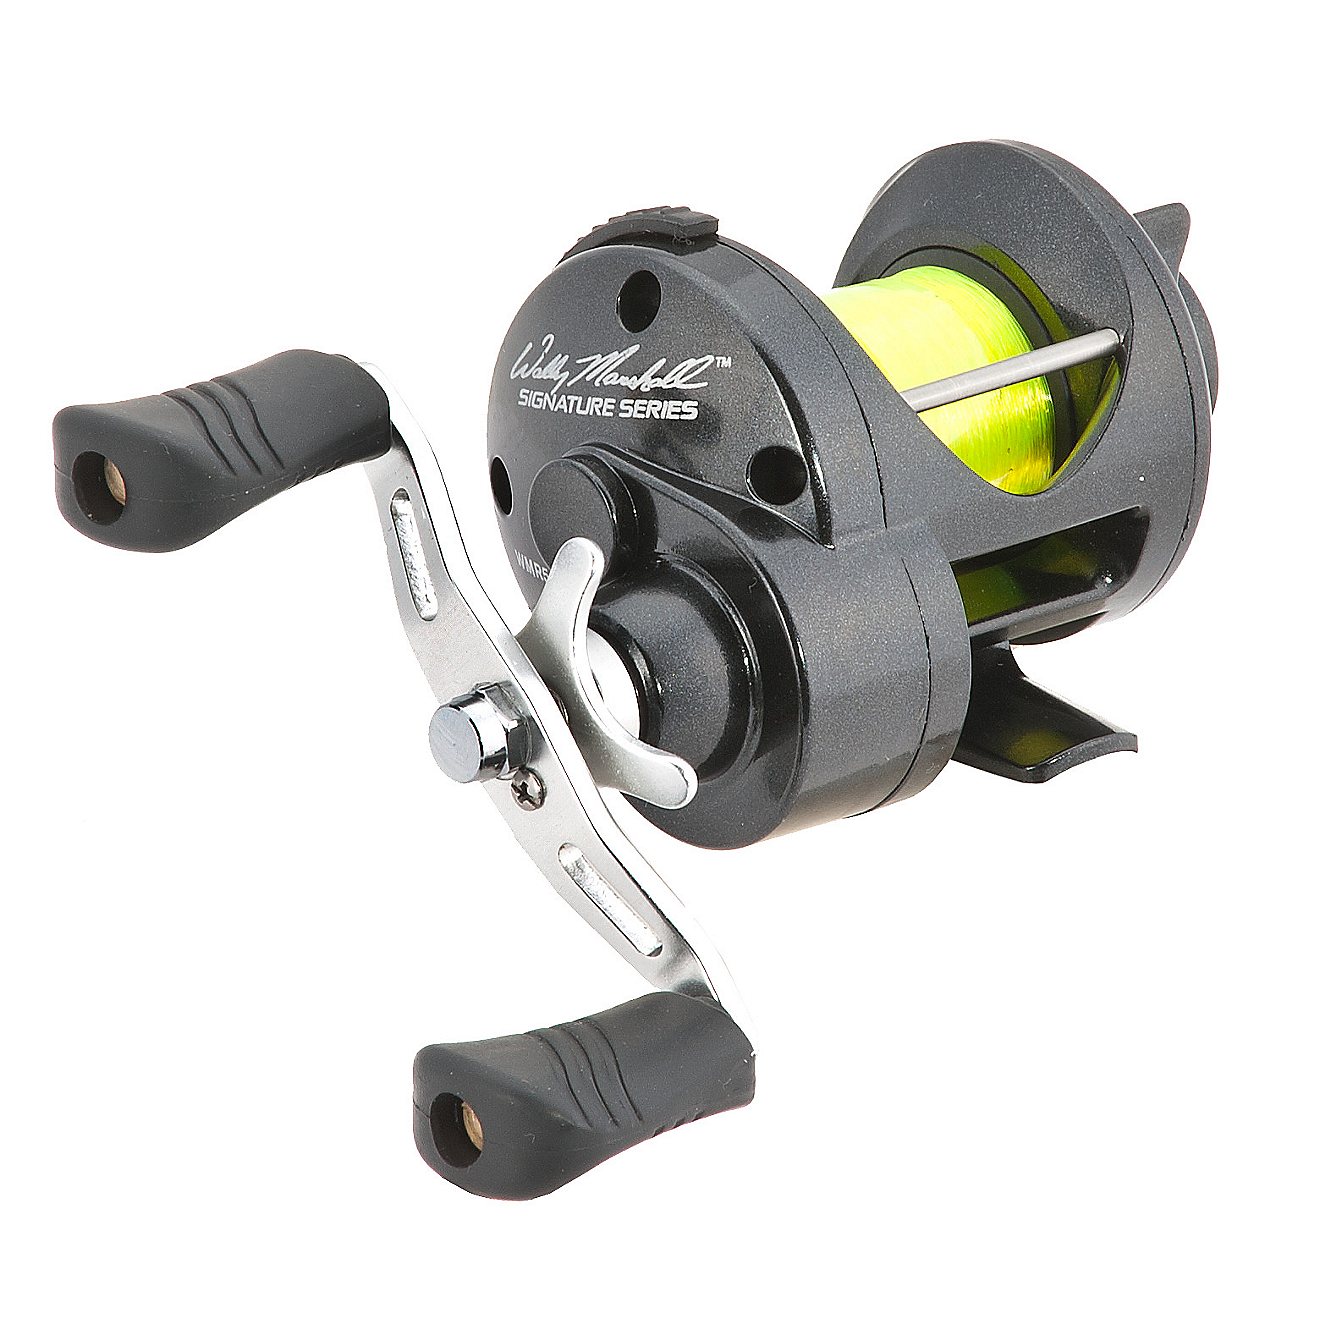 Lew's Wally Marshall Signature Series Crappie Reel Right-handed